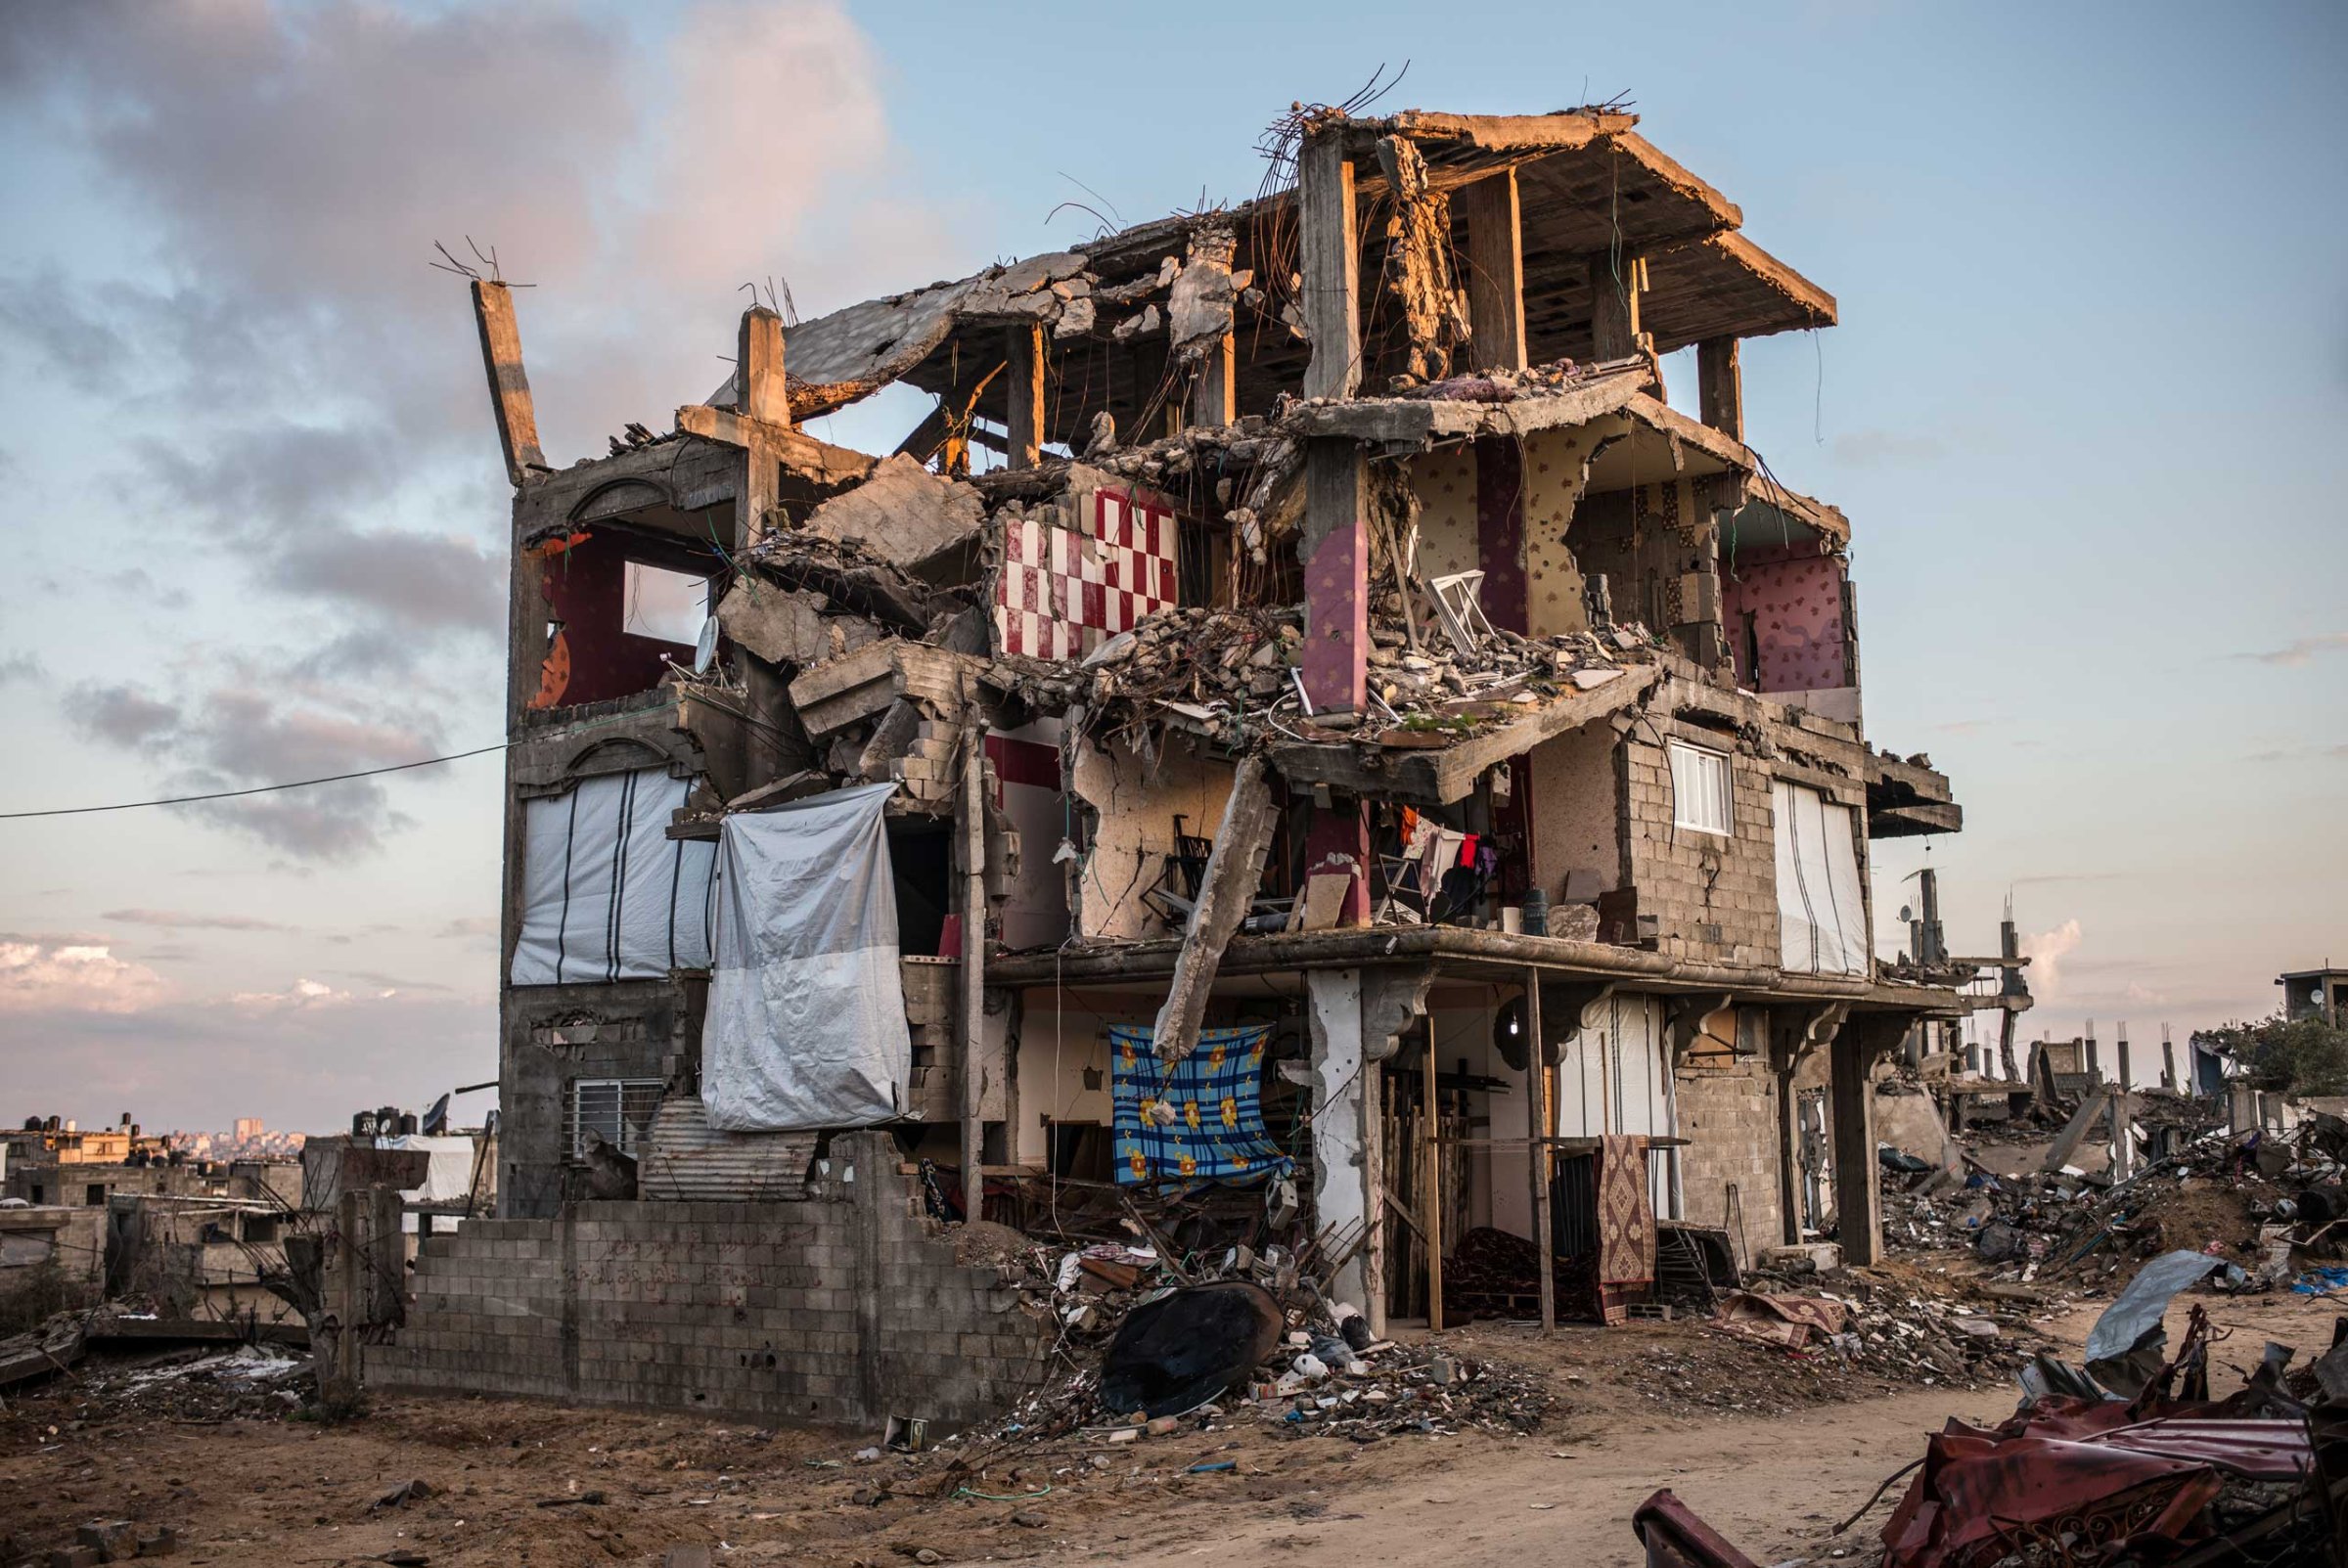 A partially destroyed building in Shejaiya, a neighborhood district of the Palestinian city of Gaza. Some family tried to replace the missing walls of their apartments with blankets. Shejaiya, Gaza. December 2014.